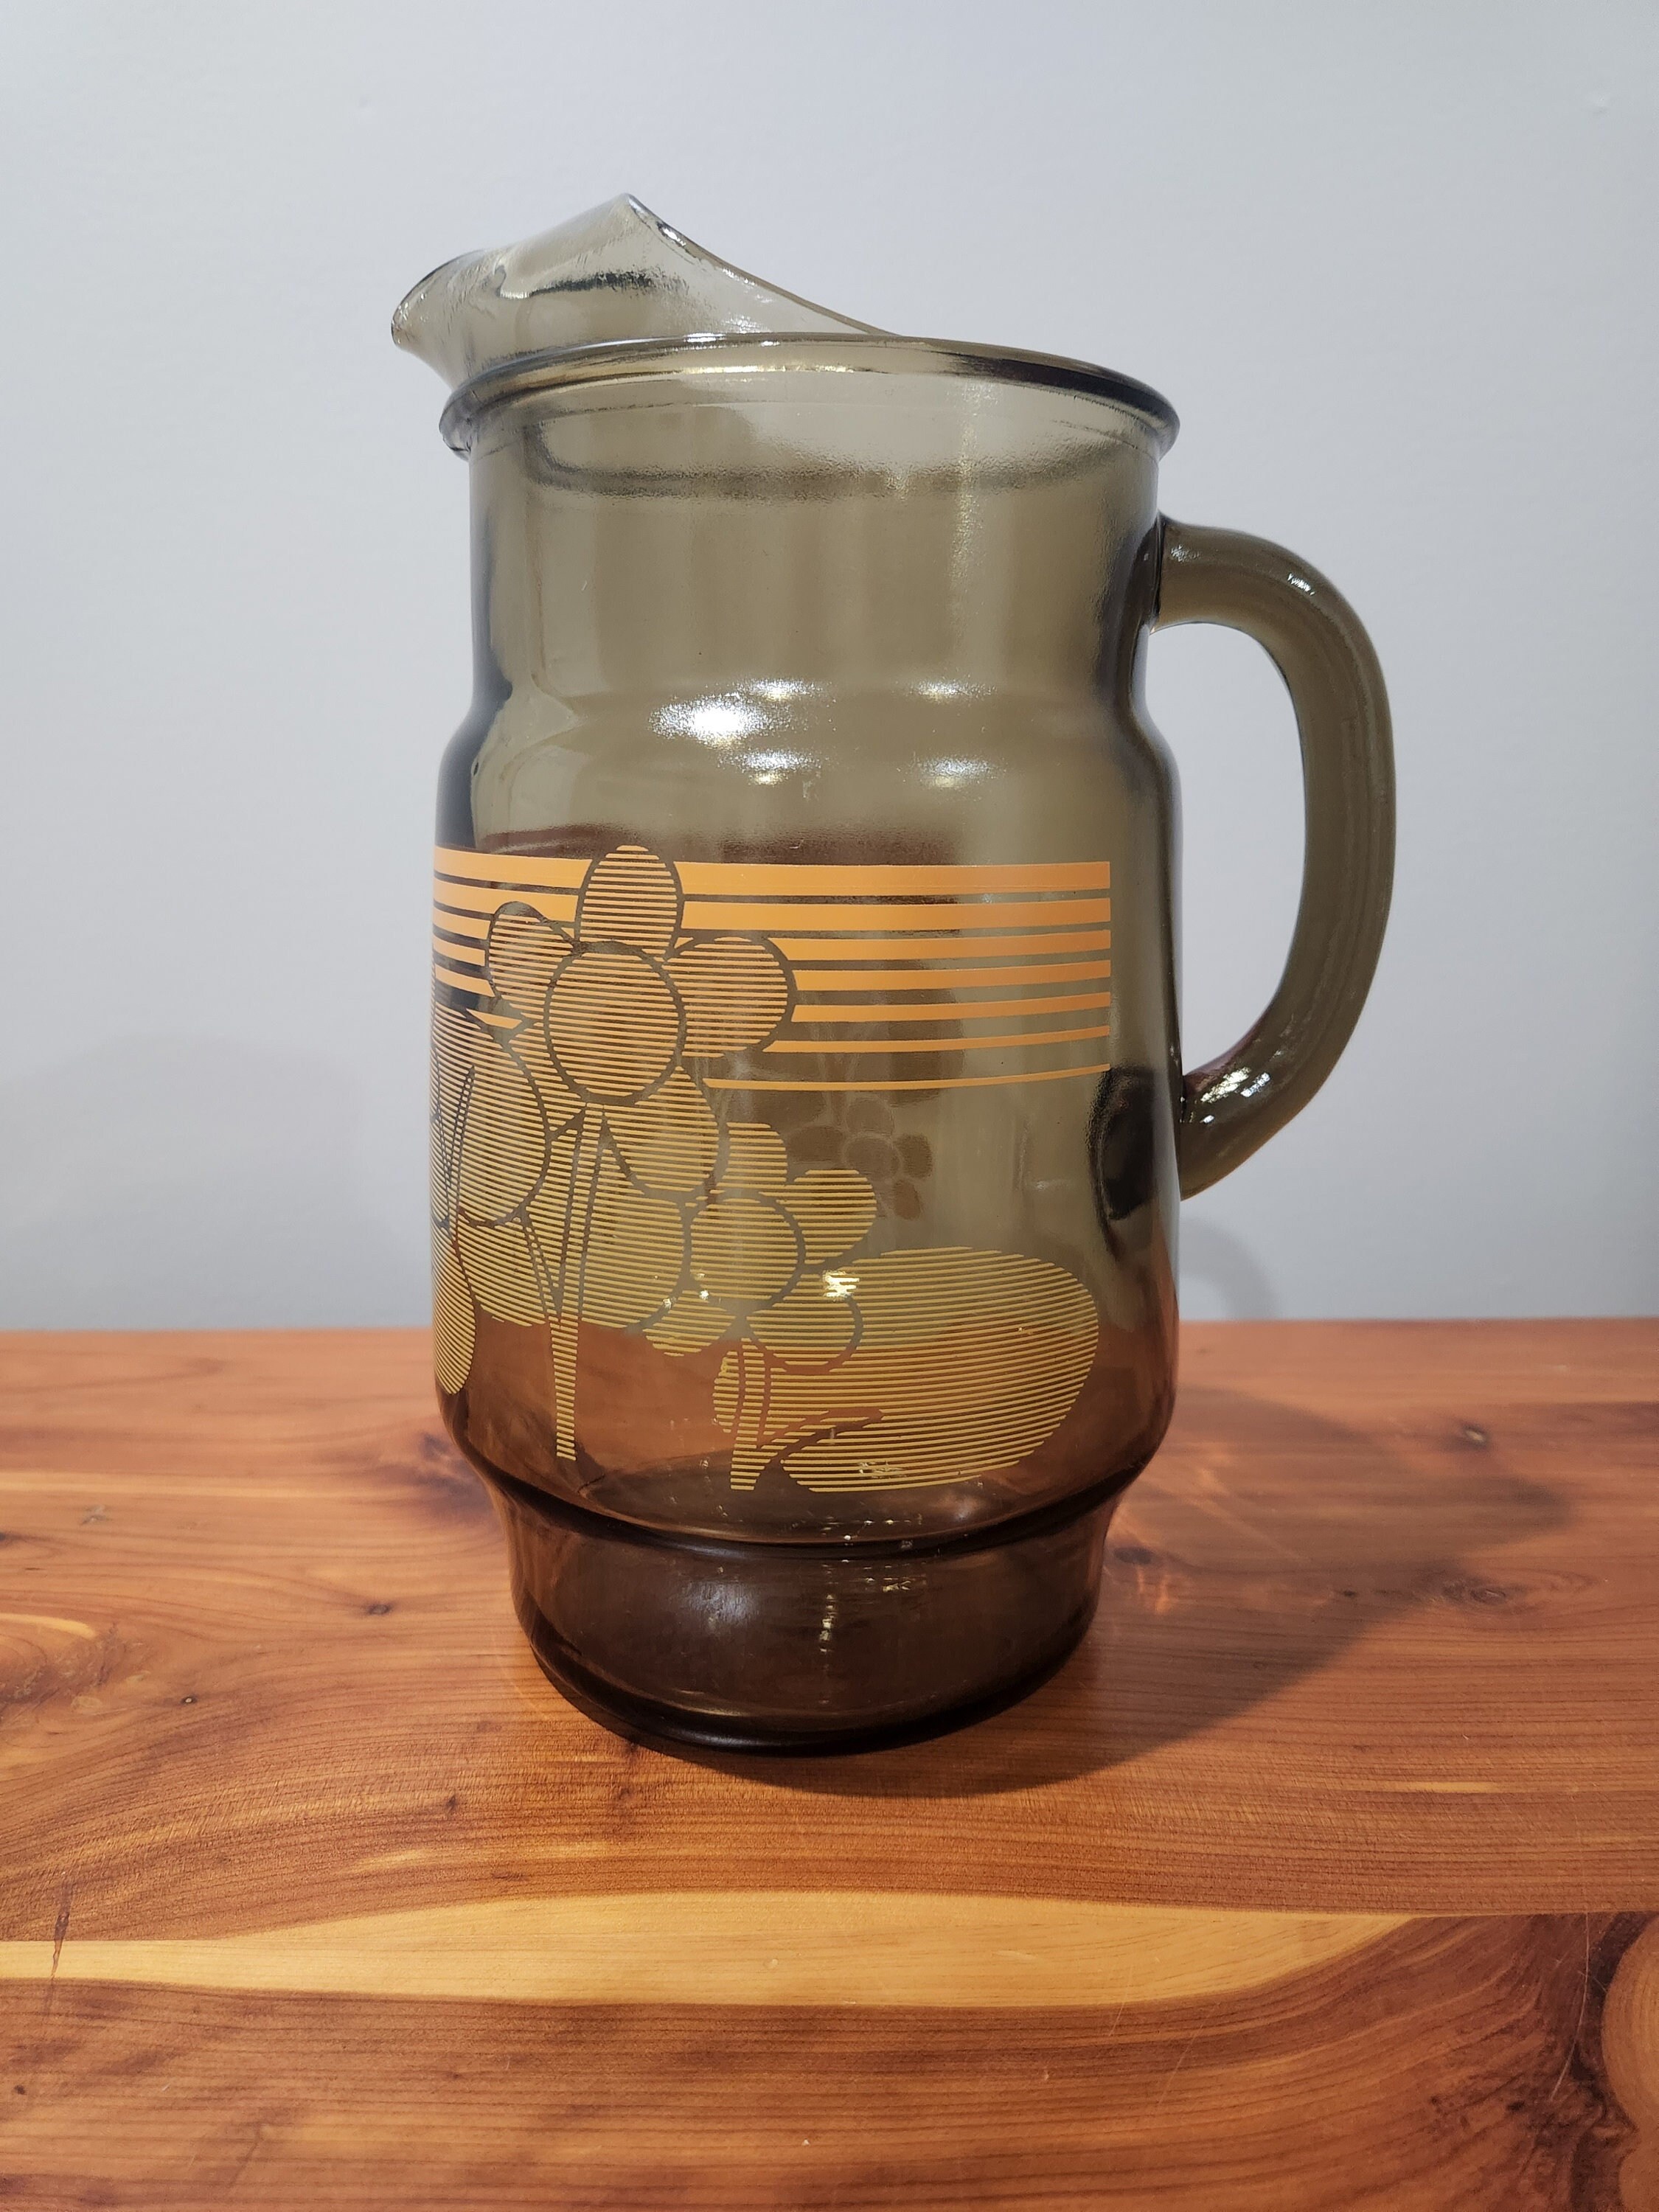 Glass Water Pitcher - Unique Strip On Neck Handle Pattern, – Stone boomer